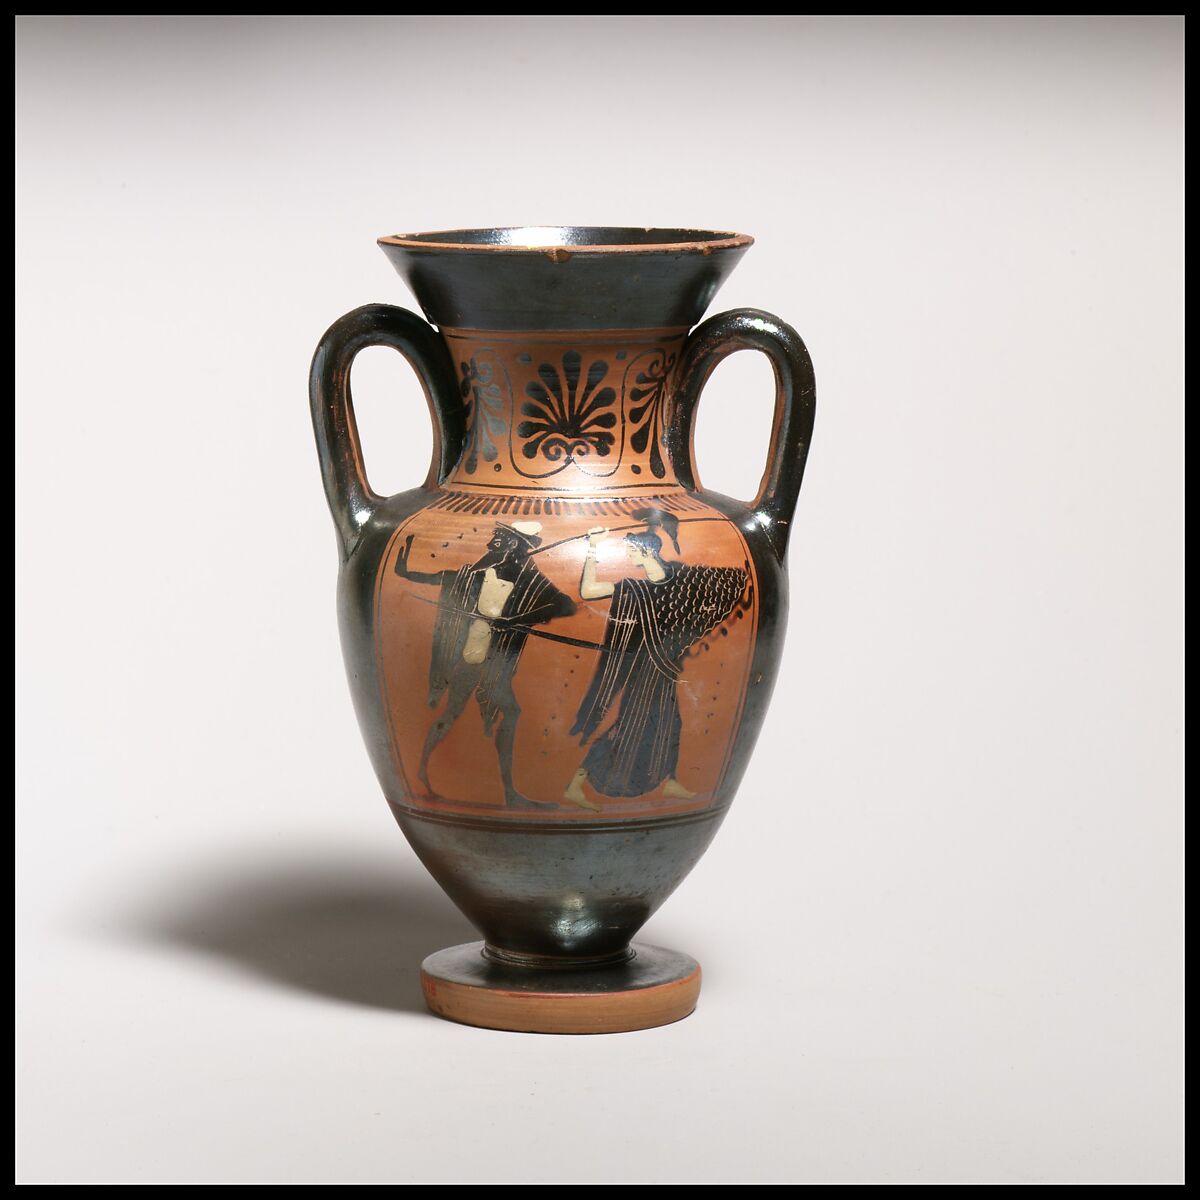 Terracotta neck-amphora (jar) with double handles, Attributed to the Diosphos Painter, Terracotta, Greek, Attic 